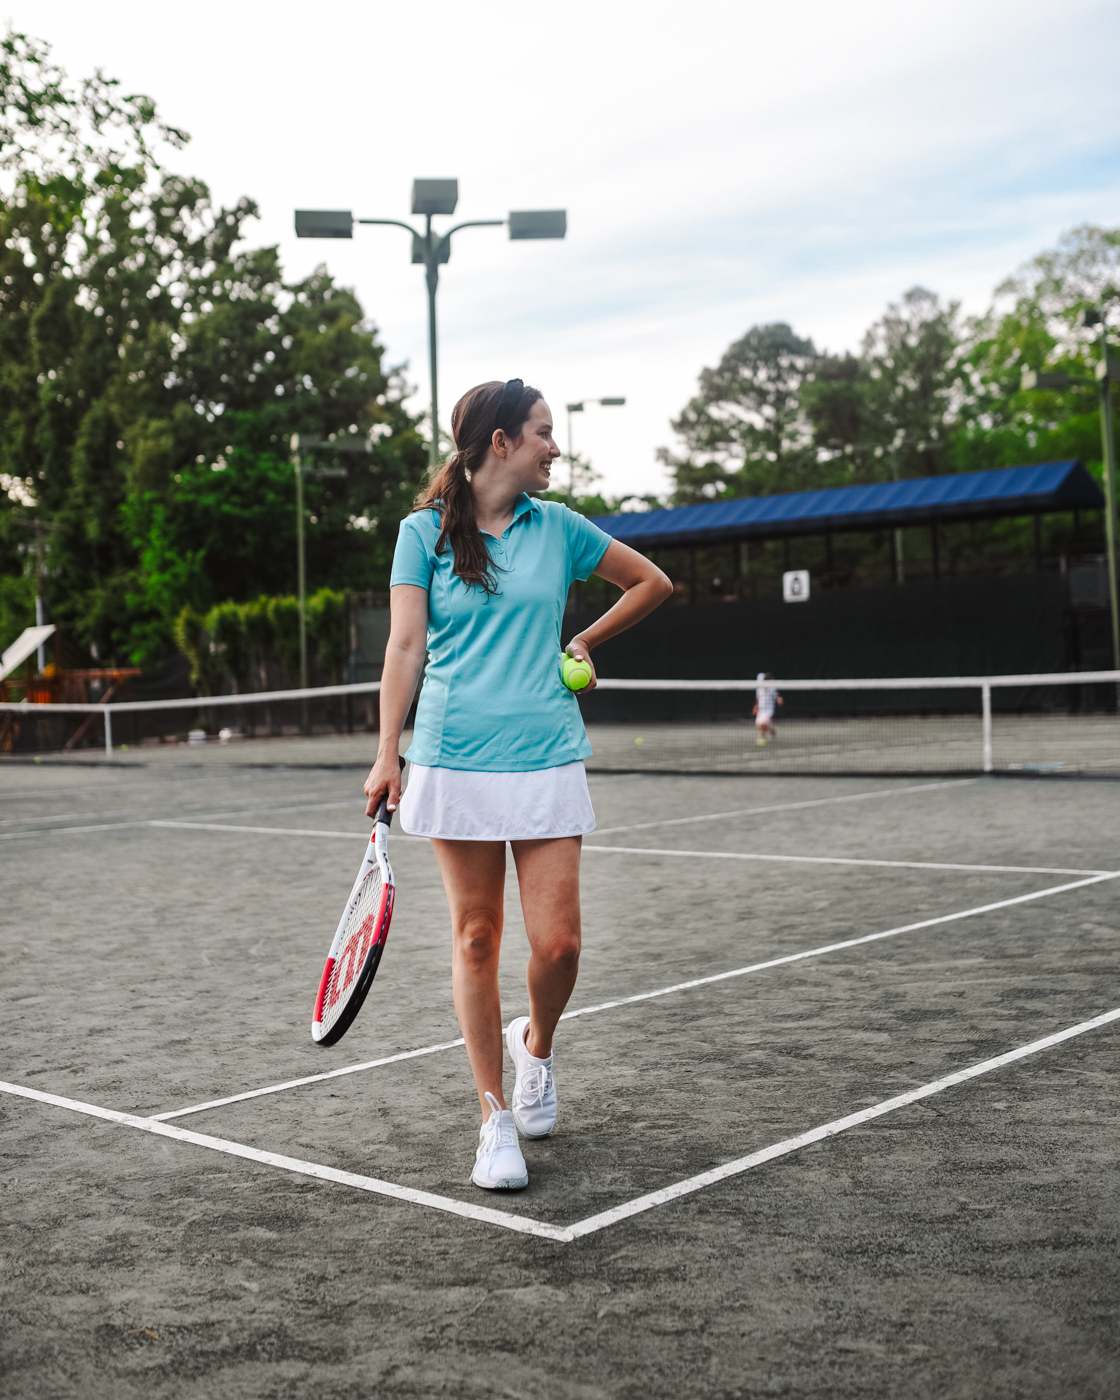 Tennis Outfits by popular Memphis fashion blog, Lone Star Looking Glass: image of a woman standing on a tennis court and holding a tennis racket and tennis ball and wearing a white tennis skirt, blue tennis polo and white sneakers. 